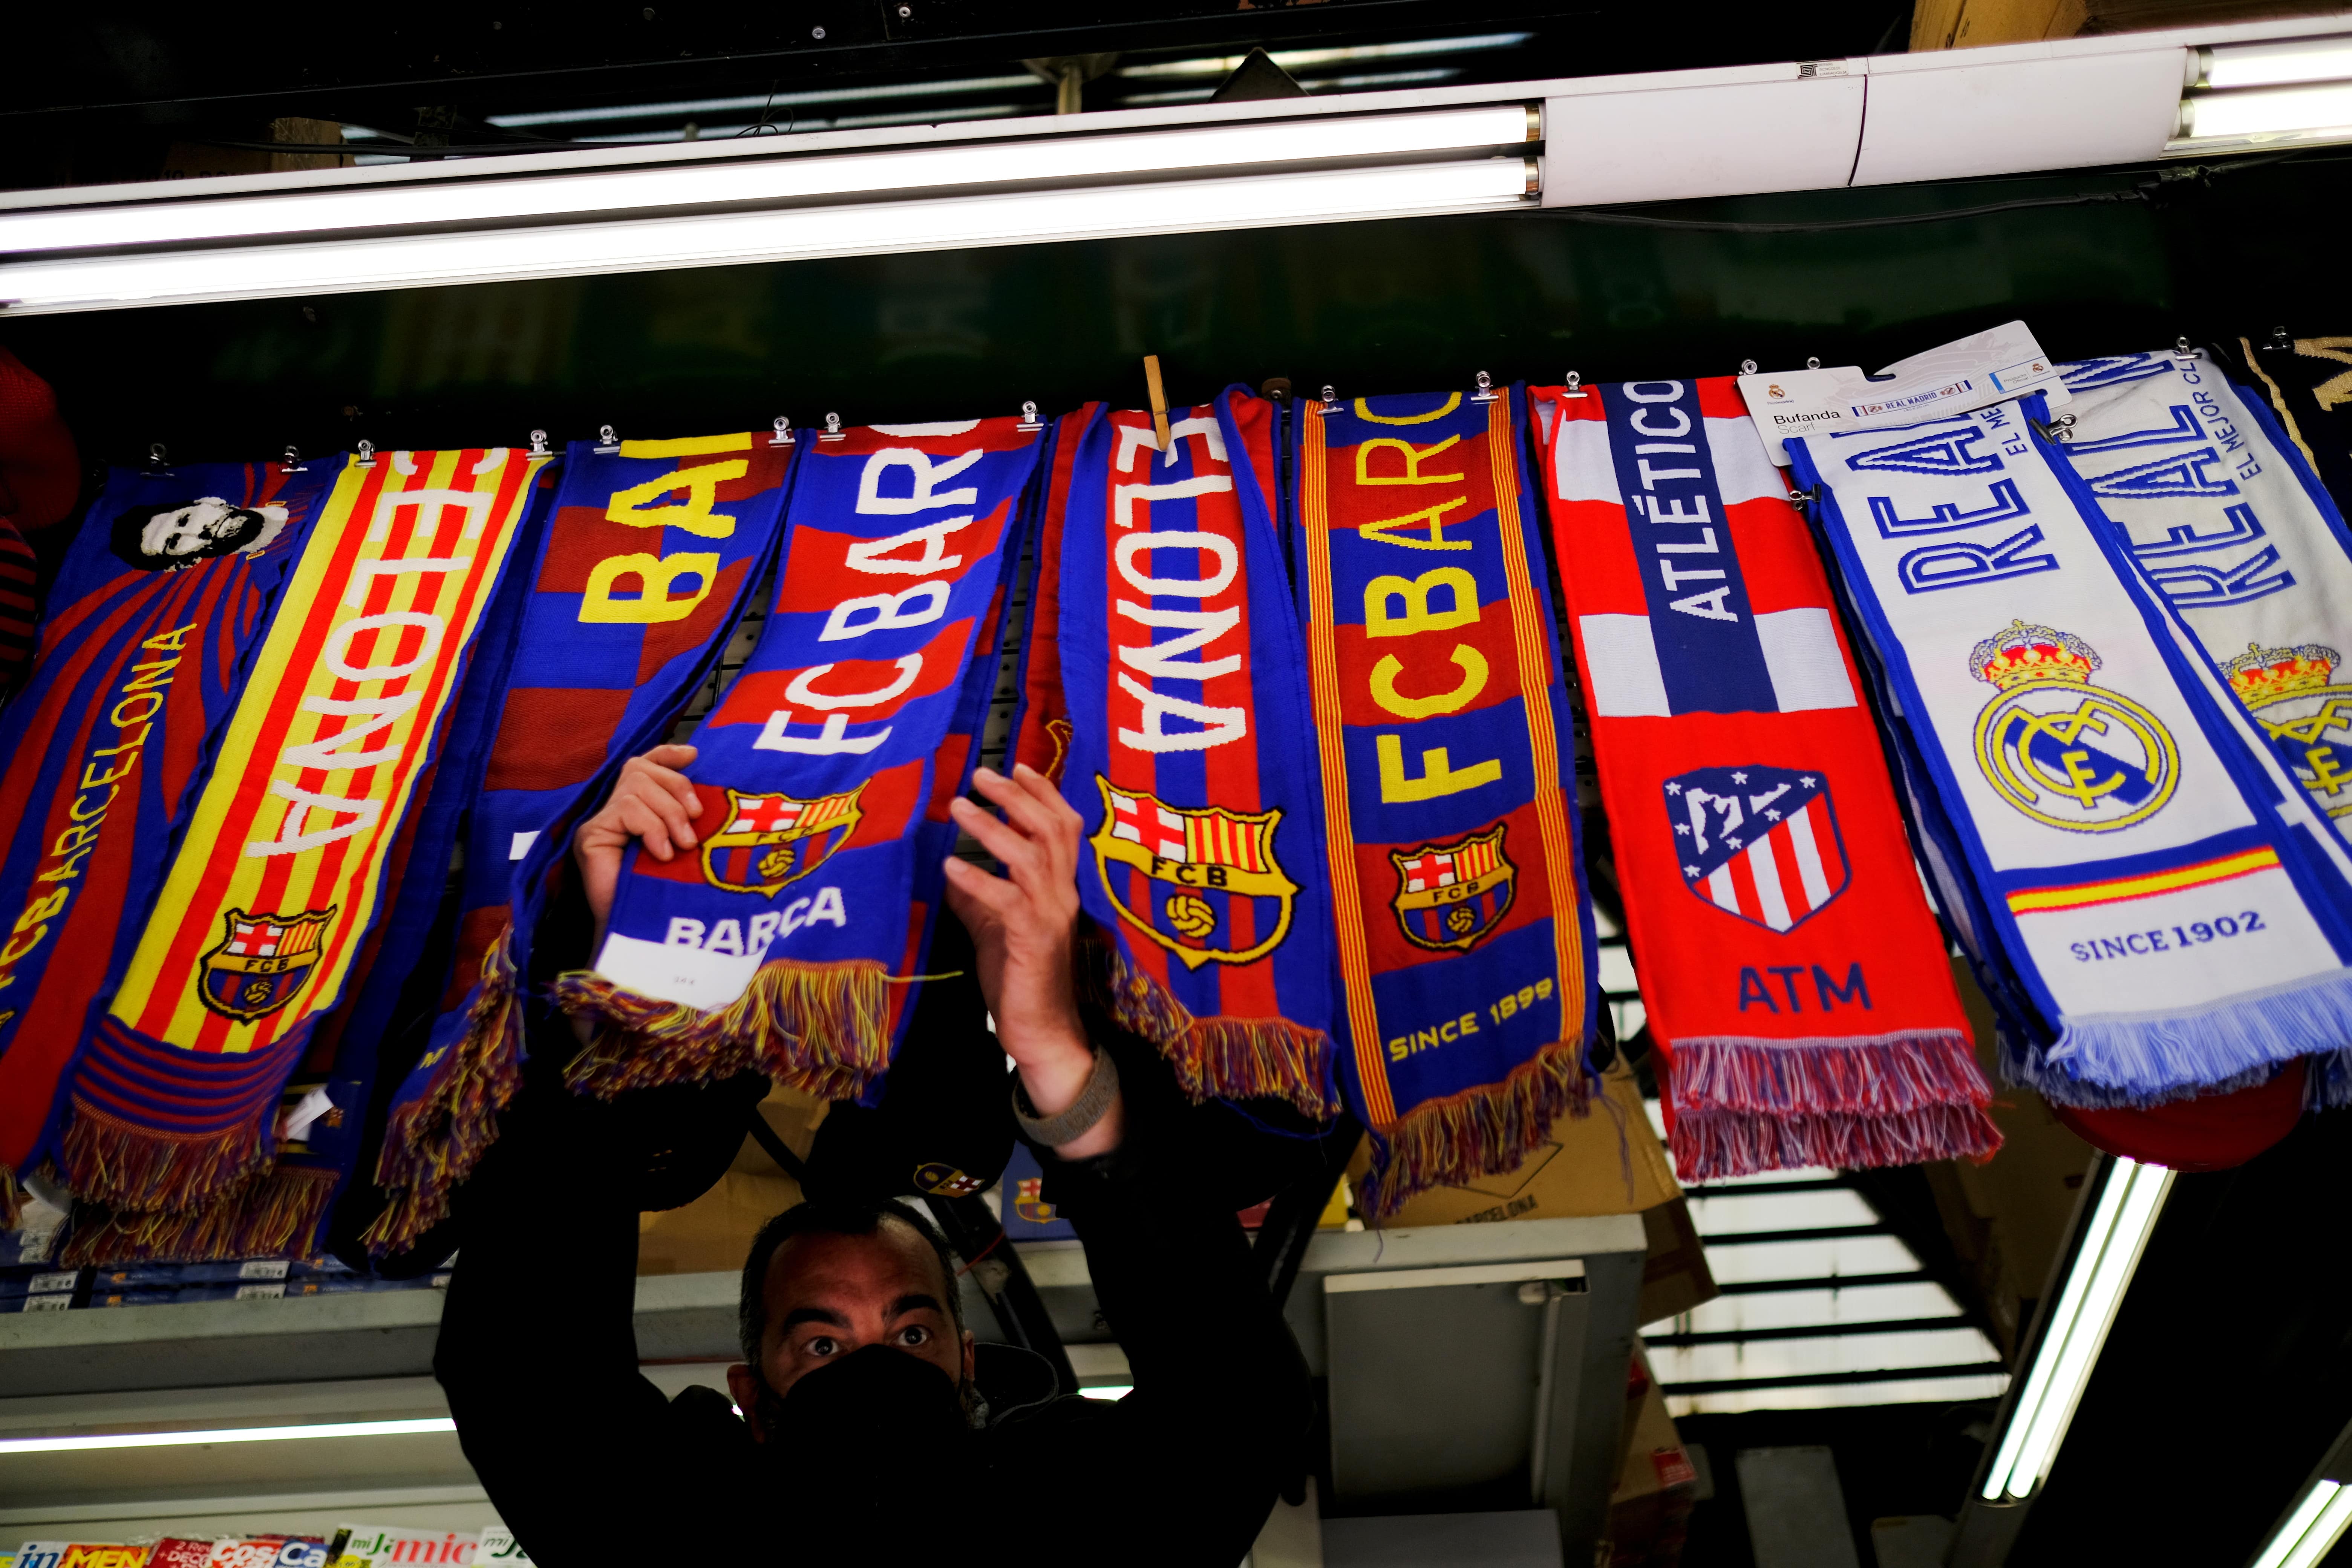 A stall selling scarves of FC Barcelona, Atletico Madrid, and Real Madrid (image from REUTERS/Nacho Doce)